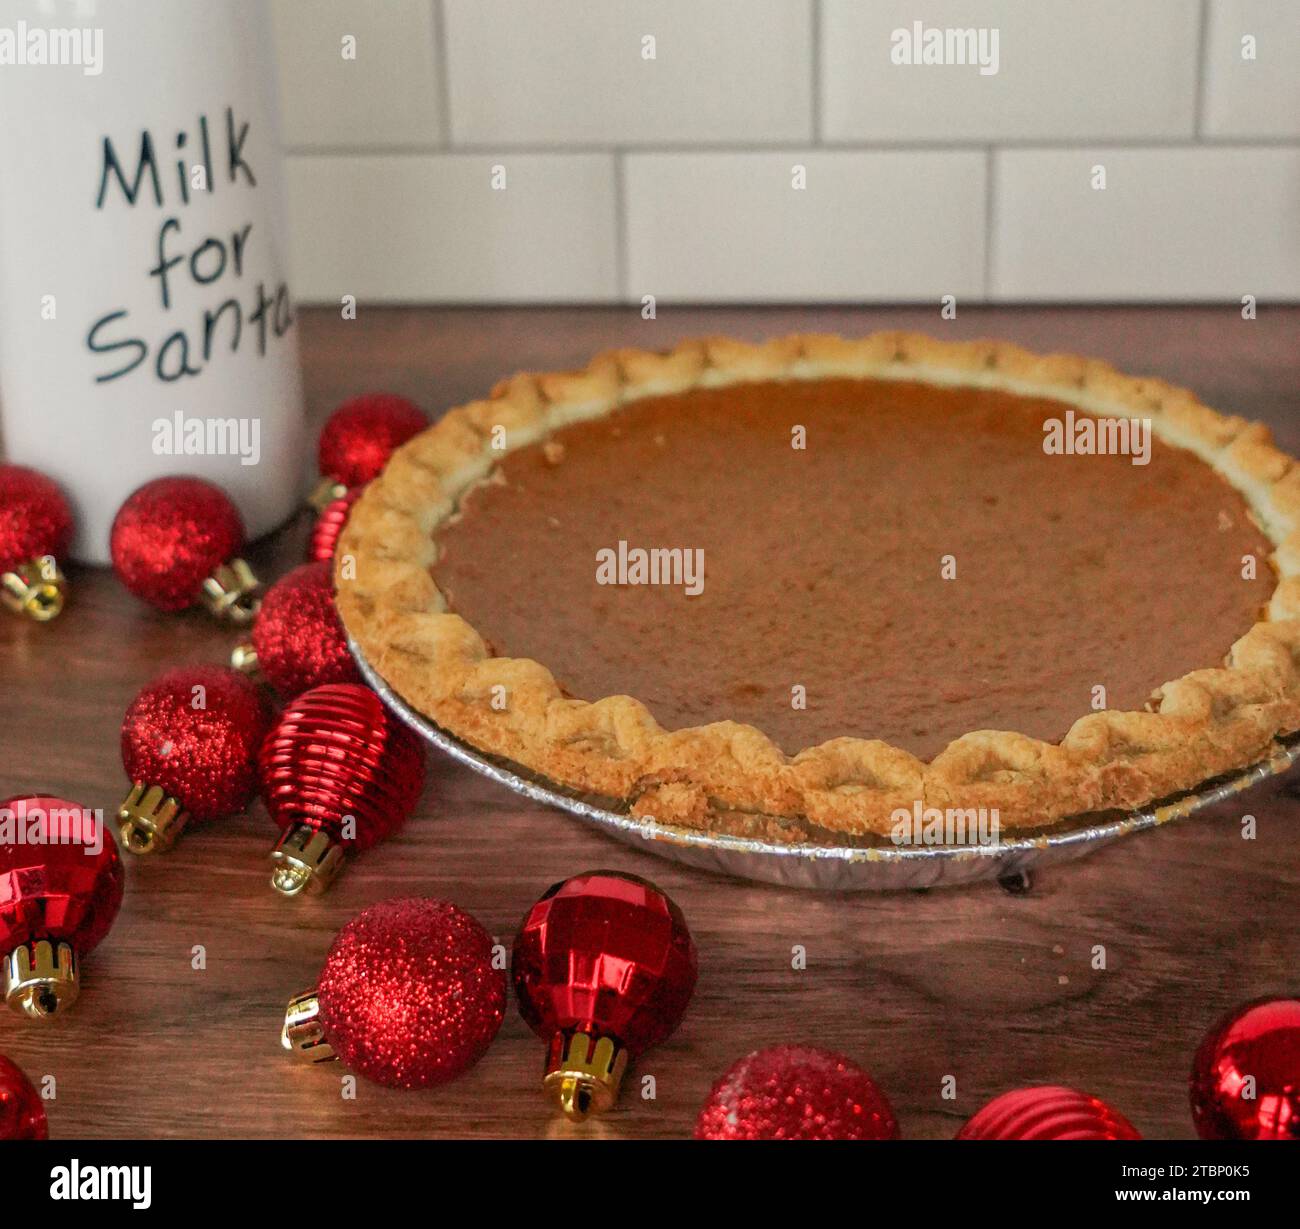 Pumpkin pie, bottle of milk for santa,surrounded by red ornaments Stock Photo